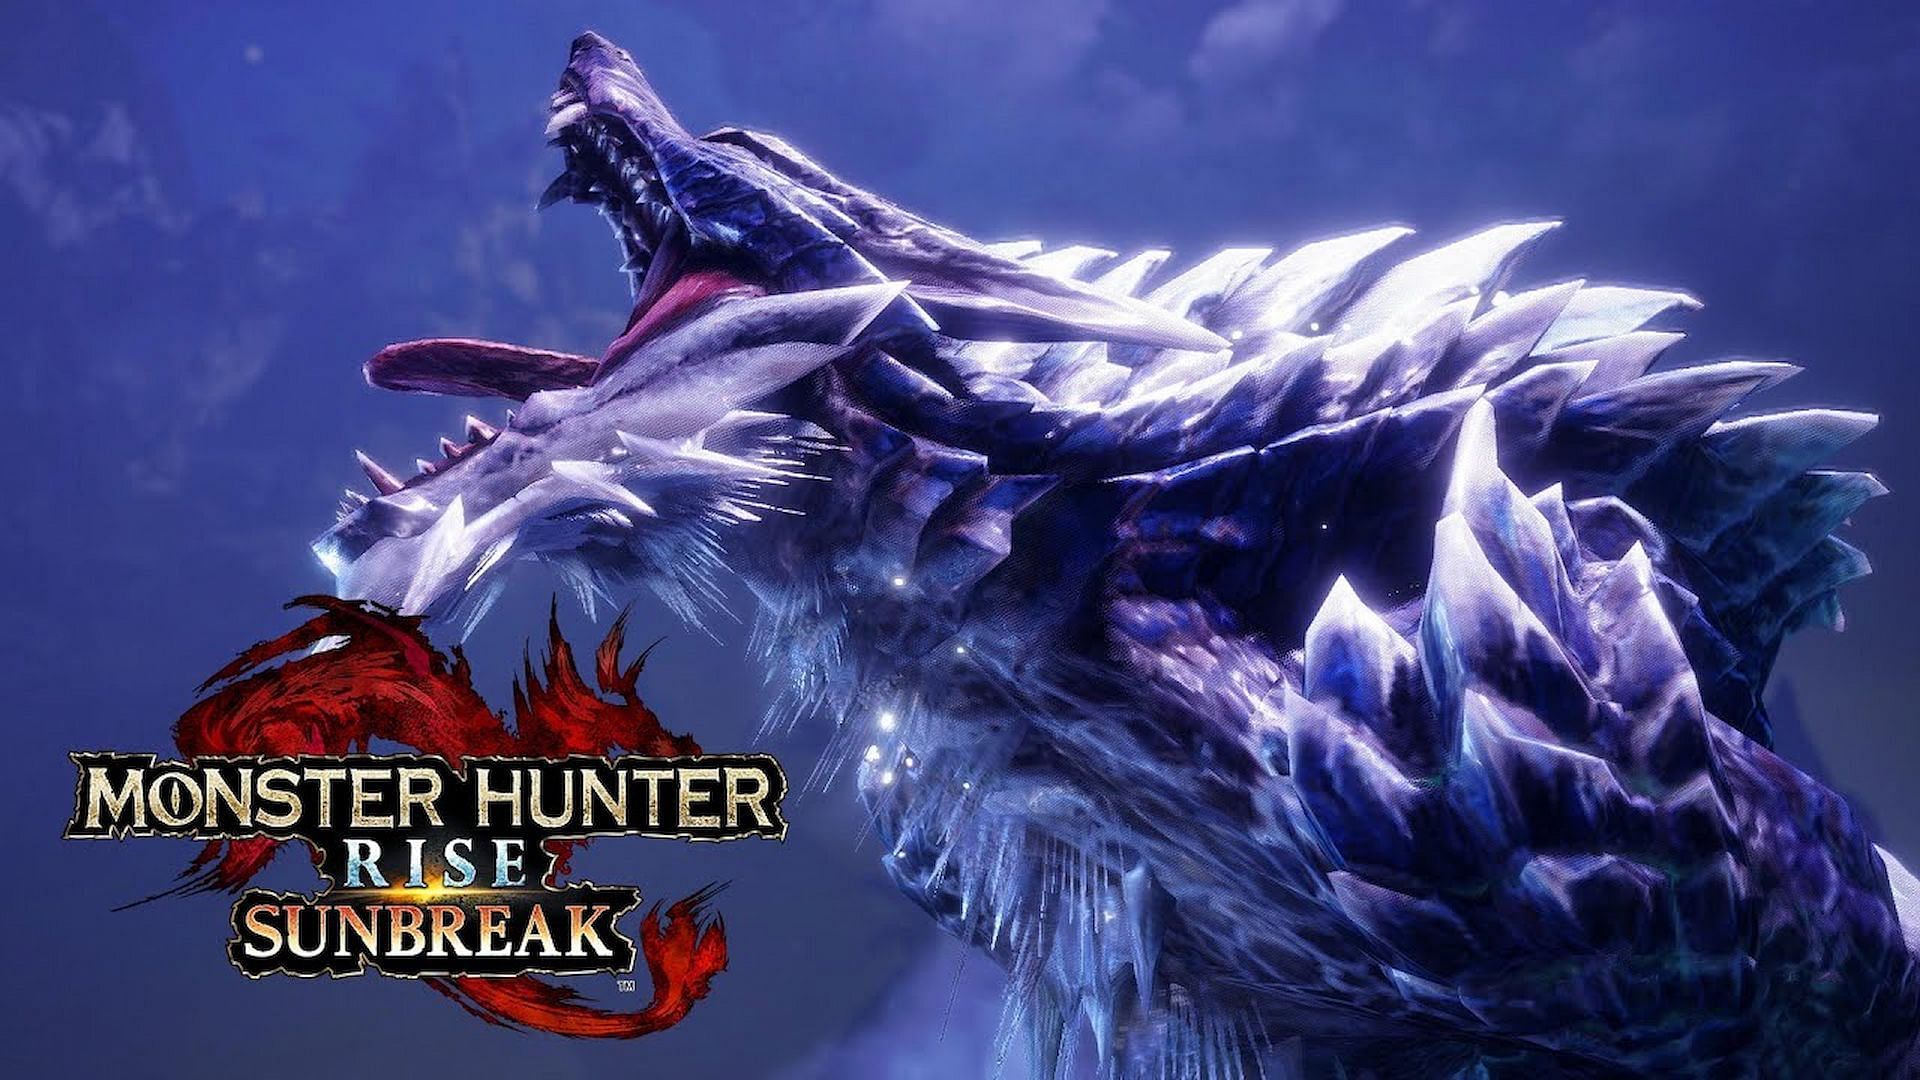 Monster Hunter Rise: Sunbreak is scheduled to be released on June 30 (Image via Capcom)